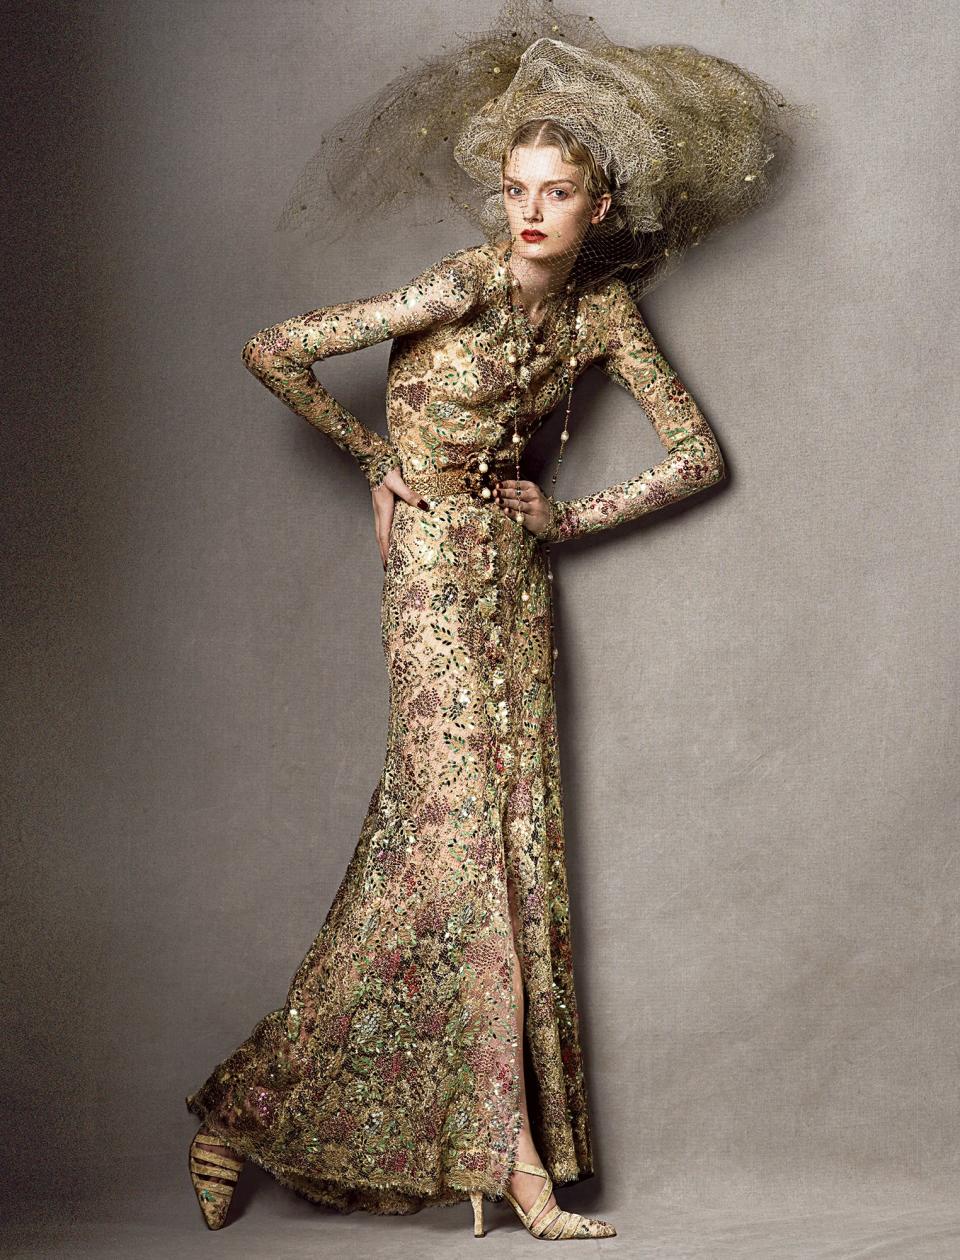 Lily Donaldson wears a Lesage-embroidered Chanel Haute Couture dress, based on one worn by Coco Chanel in 1937.